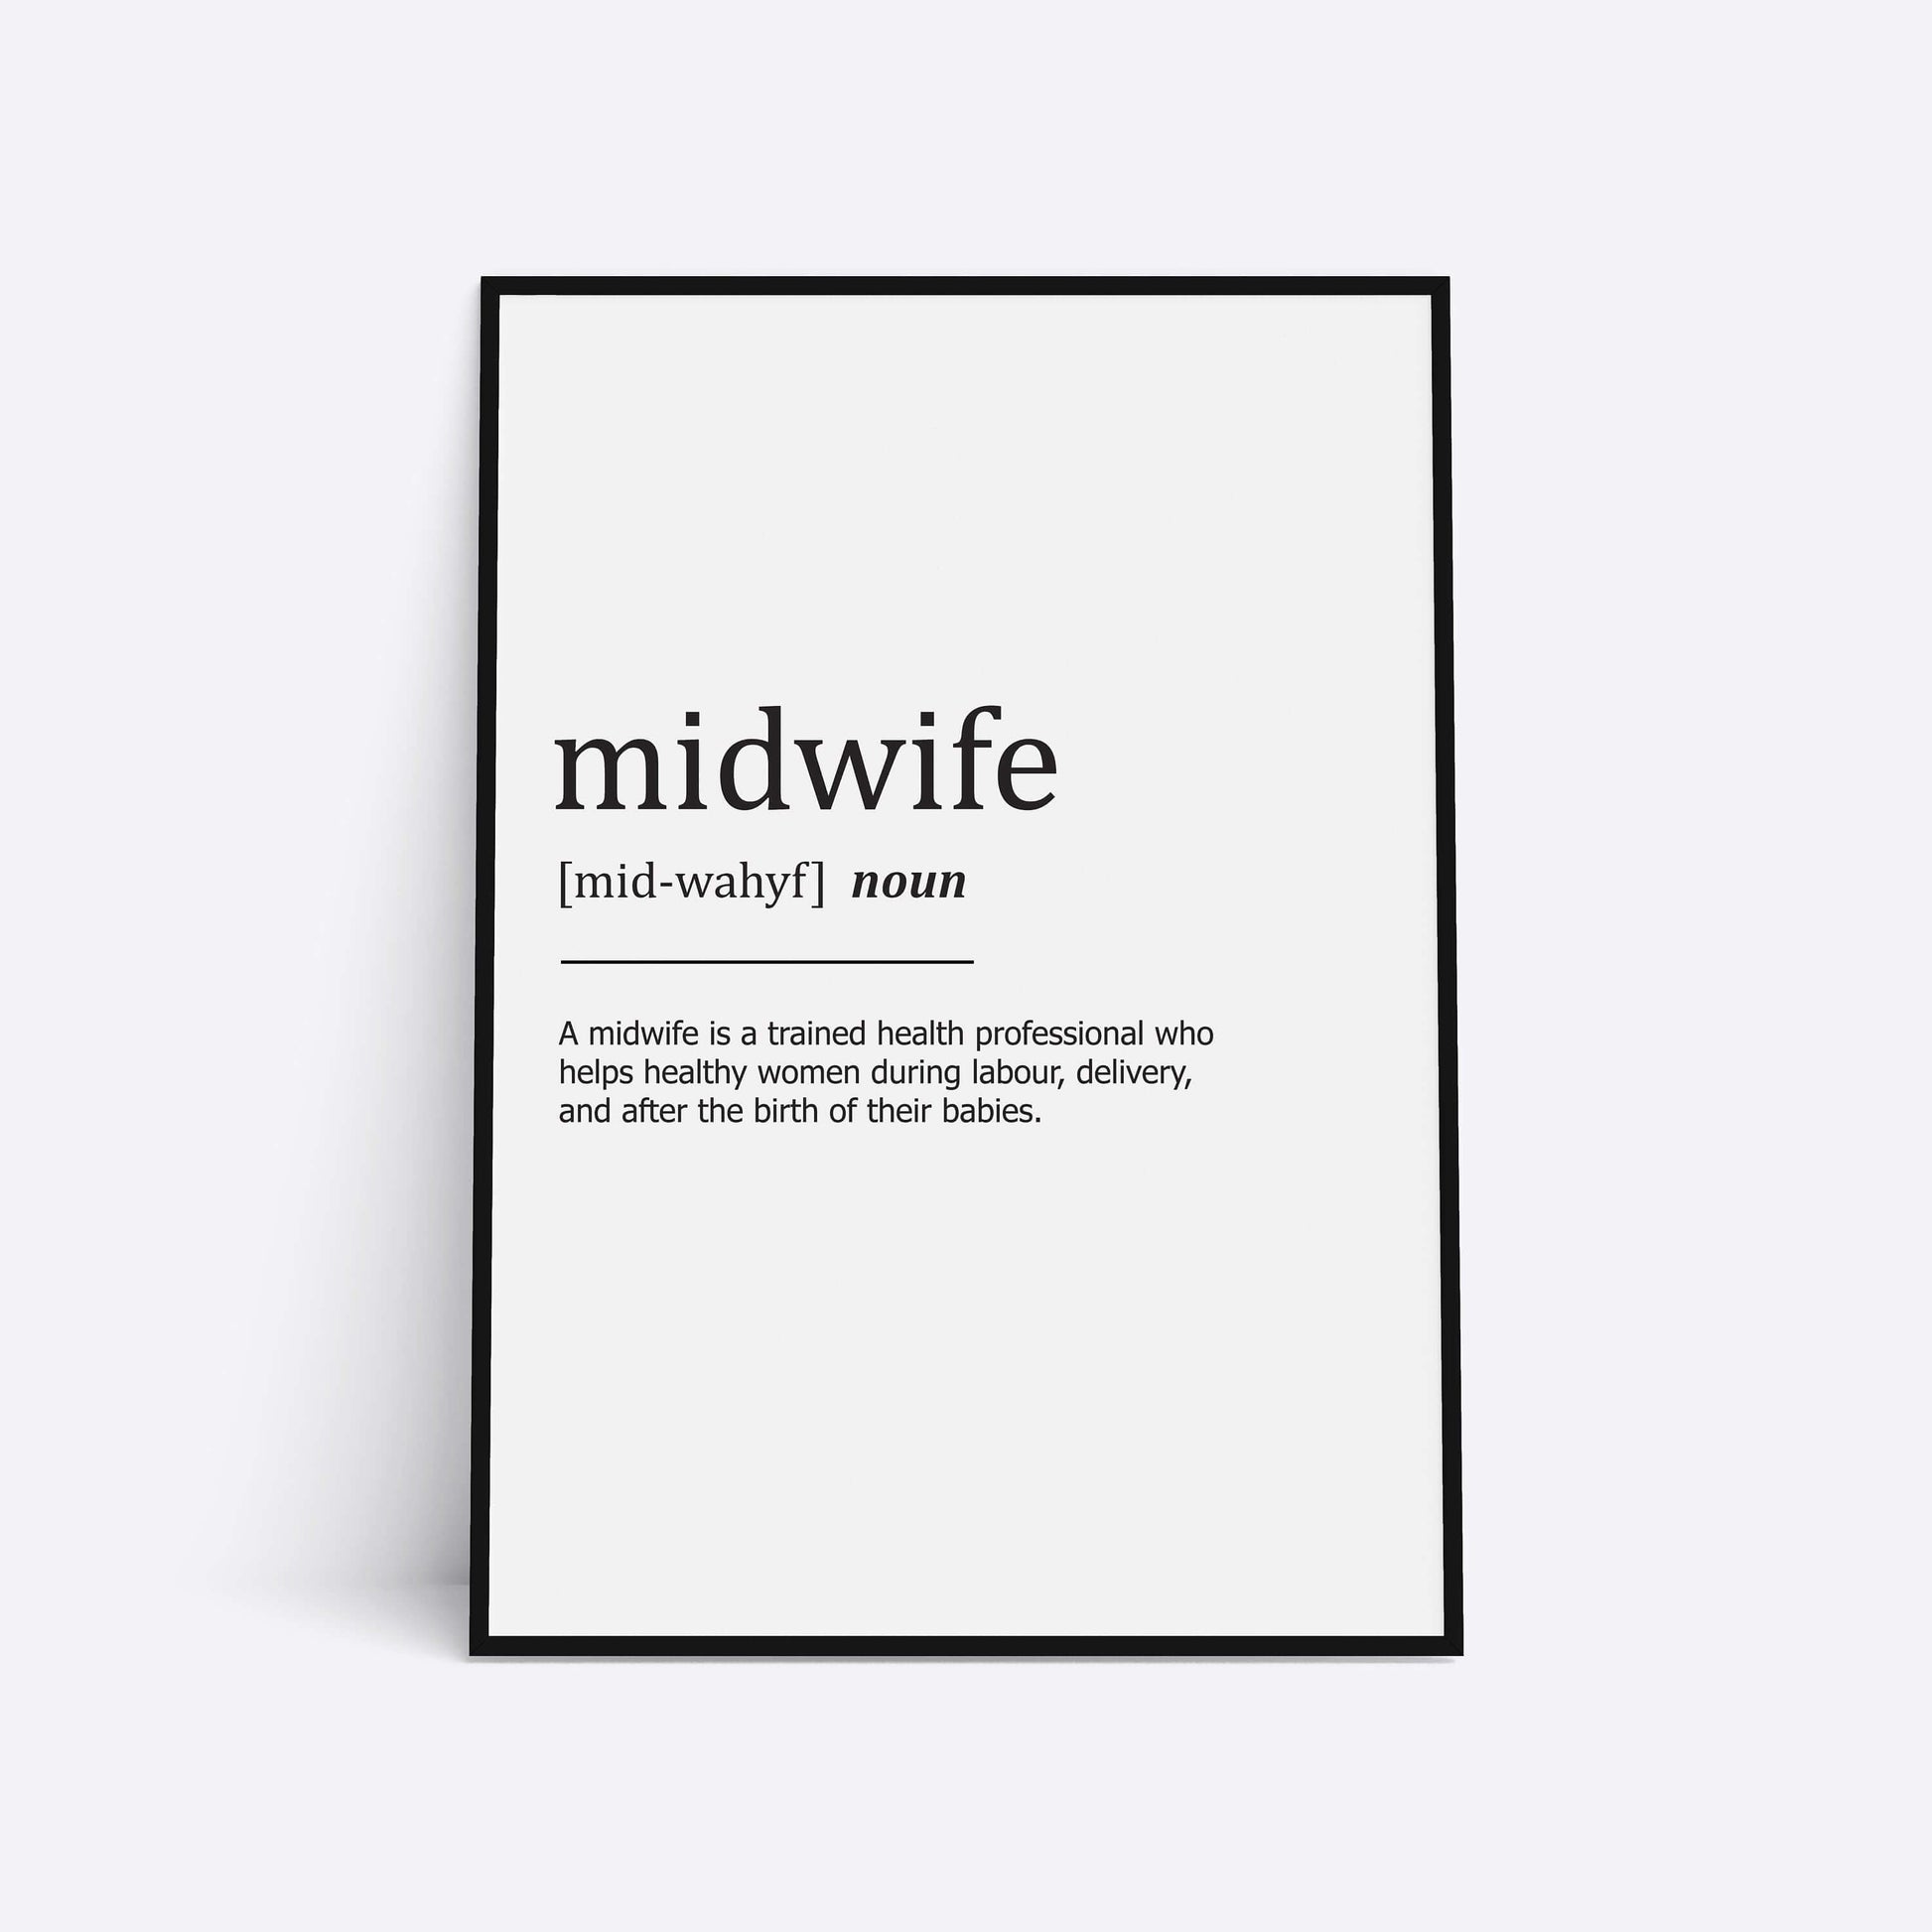 Midwife Definition Print, Midwife Gift, Wall Art, Nurse Graduation Gift, Wall Decor, Home Wall Art, Quote Print, Thank You Gift